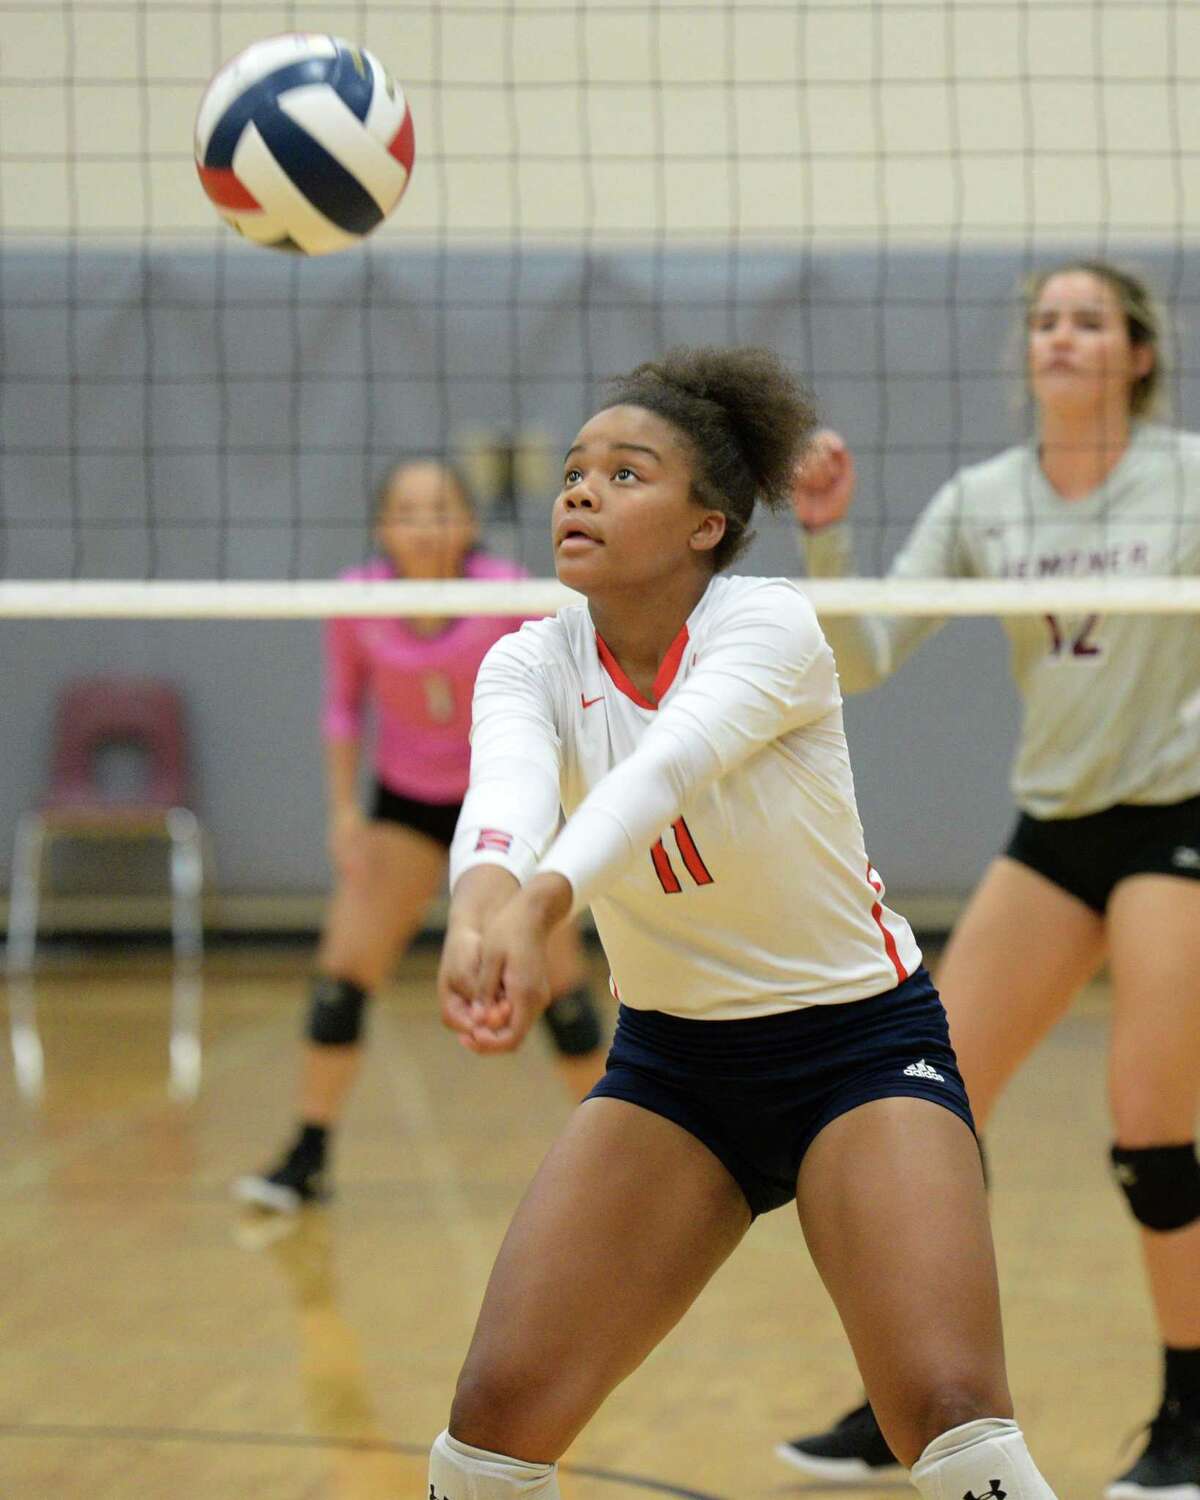 Madison Harris (11) of Alief Taylor digs for a ball during the second set of a volleyball match between the Kempner Cougars and the Alief Taylor Lions on Saturday, August 10, 2019 at Cinco Ranch HS, Katy, TX.